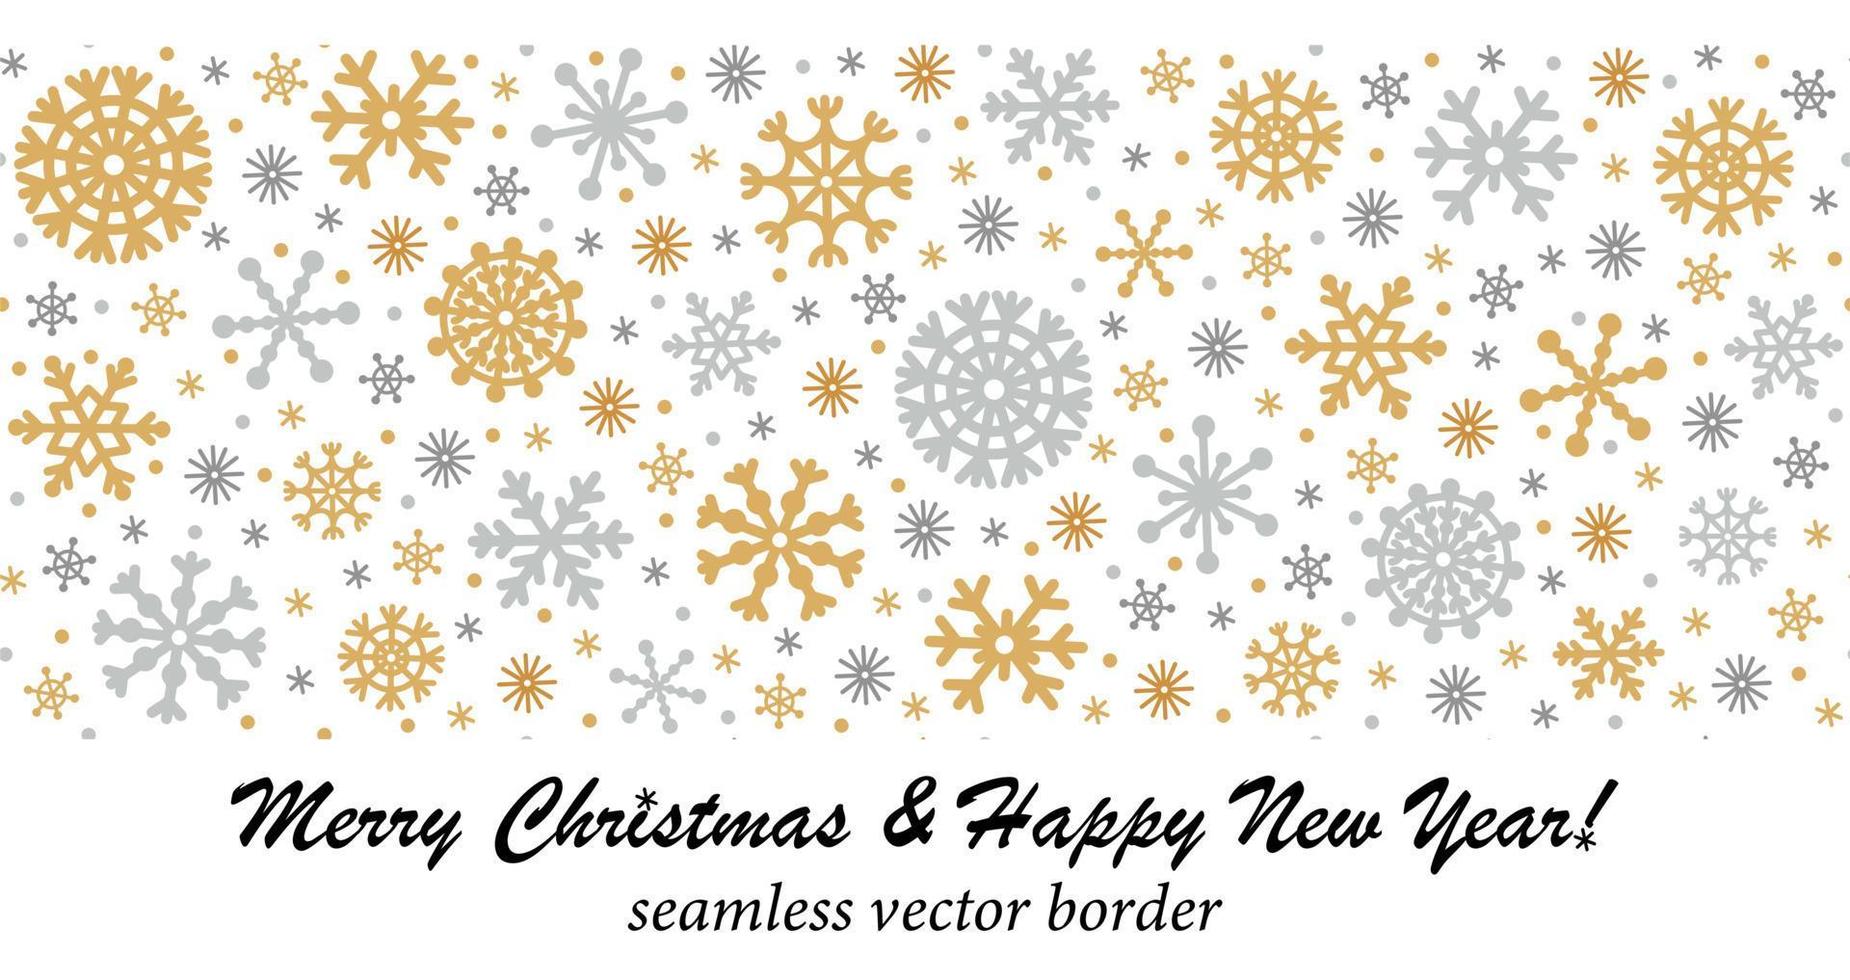 Snowflakes seamless vector border. Hand-drawn horizontal pattern. Gold, silver crystals of ice on a white background. Cozy winter banner. Festive concept for decoration, postcard design, printing